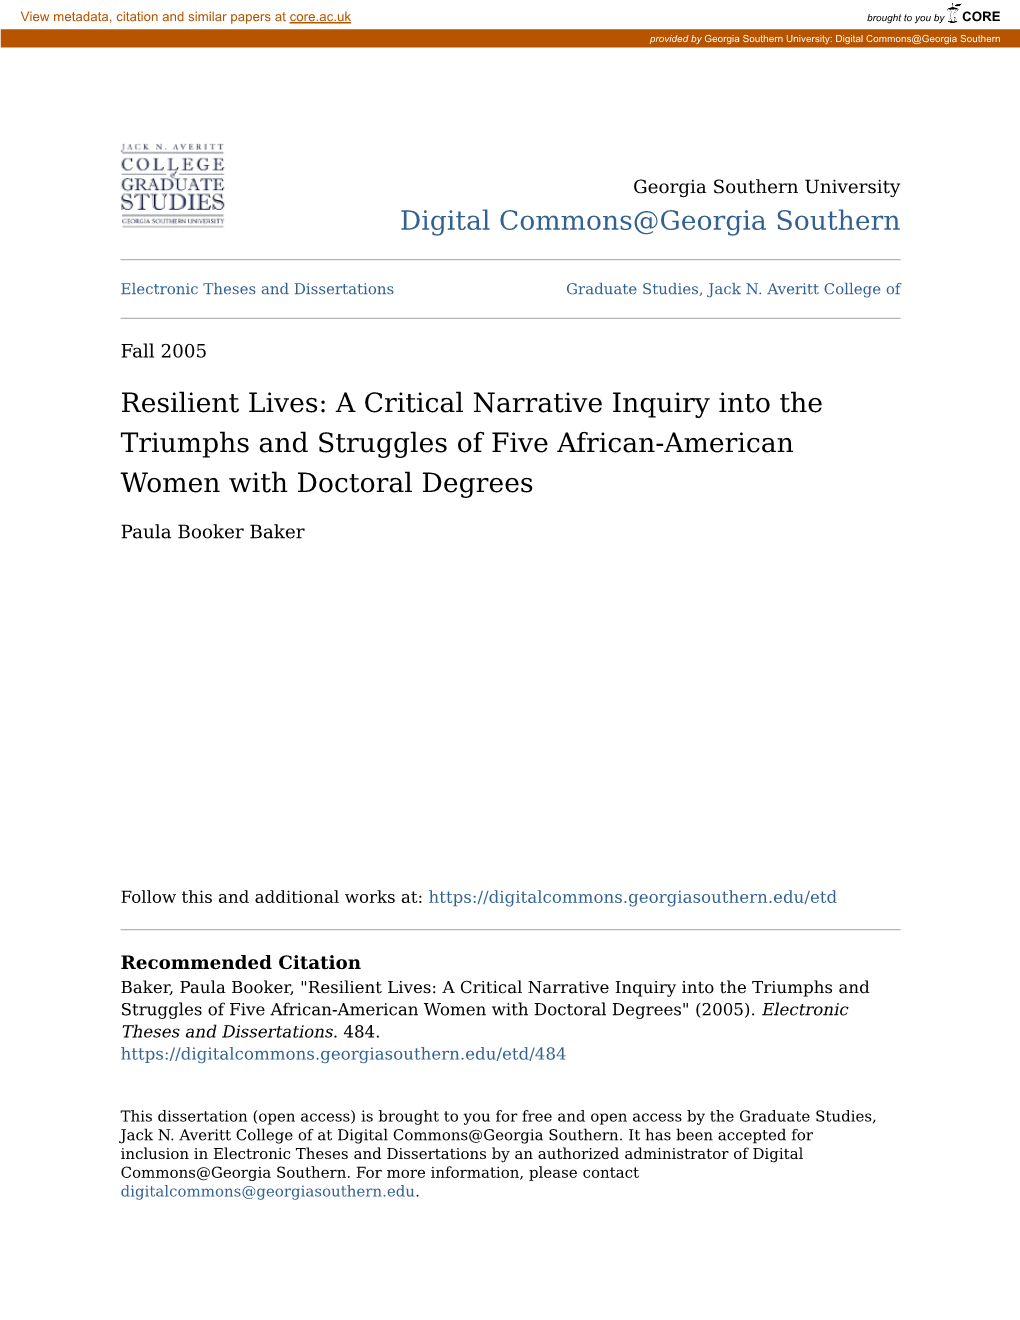 A Critical Narrative Inquiry Into the Triumphs and Struggles of Five African-American Women with Doctoral Degrees